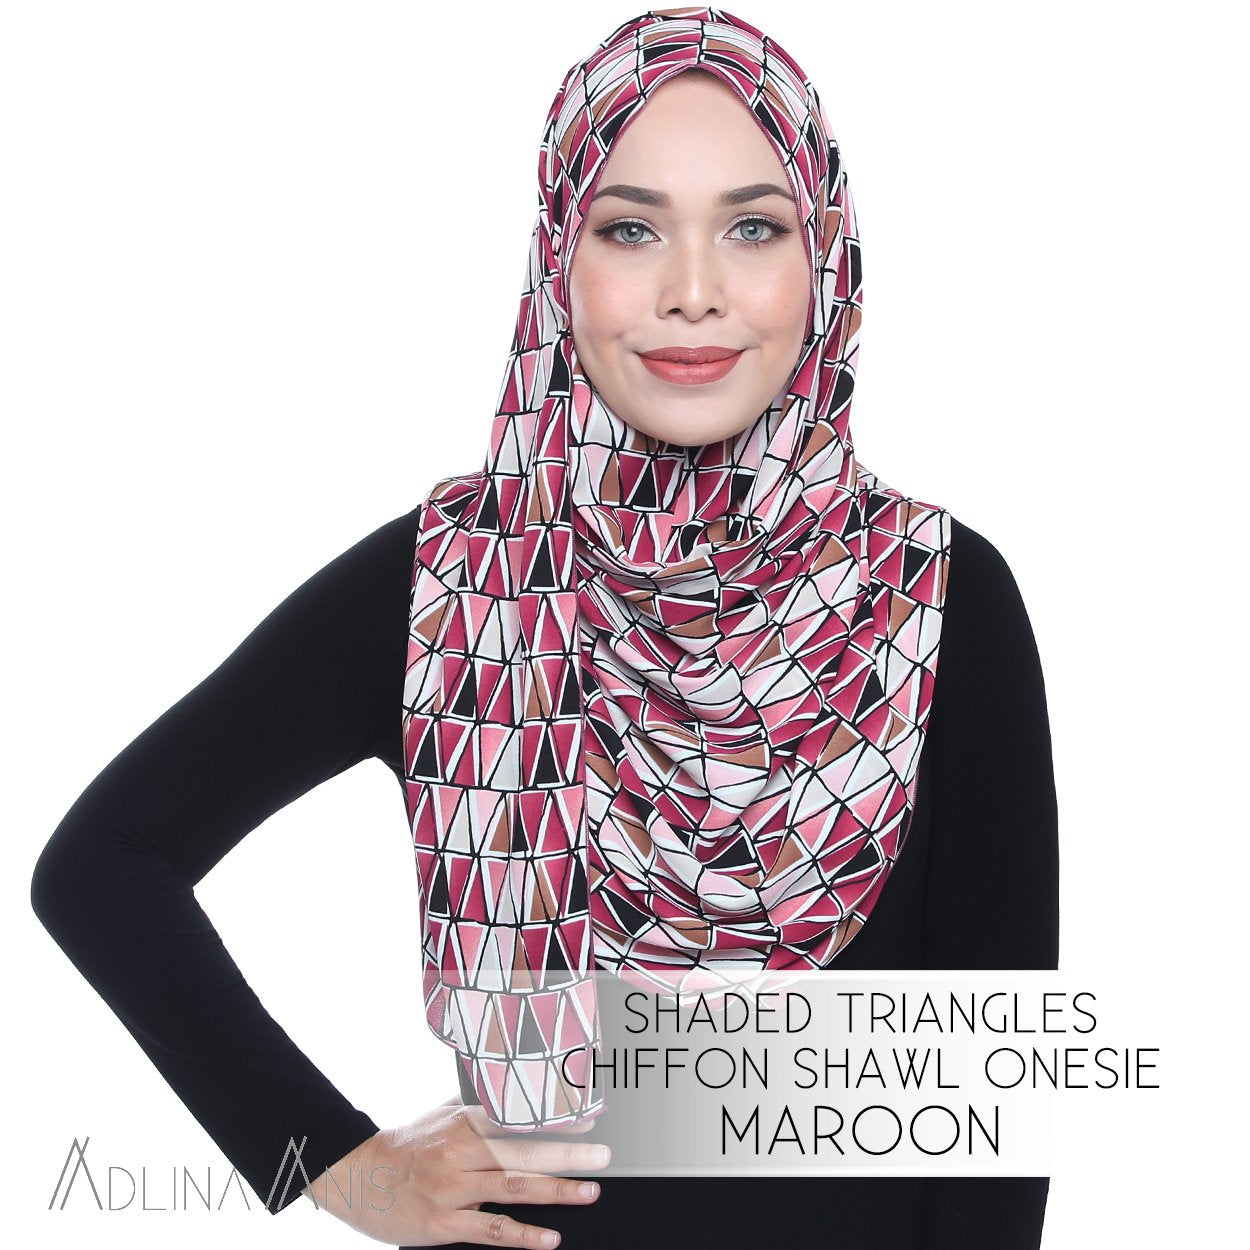 Shaded Triangles Chiffon Shawl Onesie - Maroon - Instant Hijabs - Adlina Anis - Third Culture Boutique